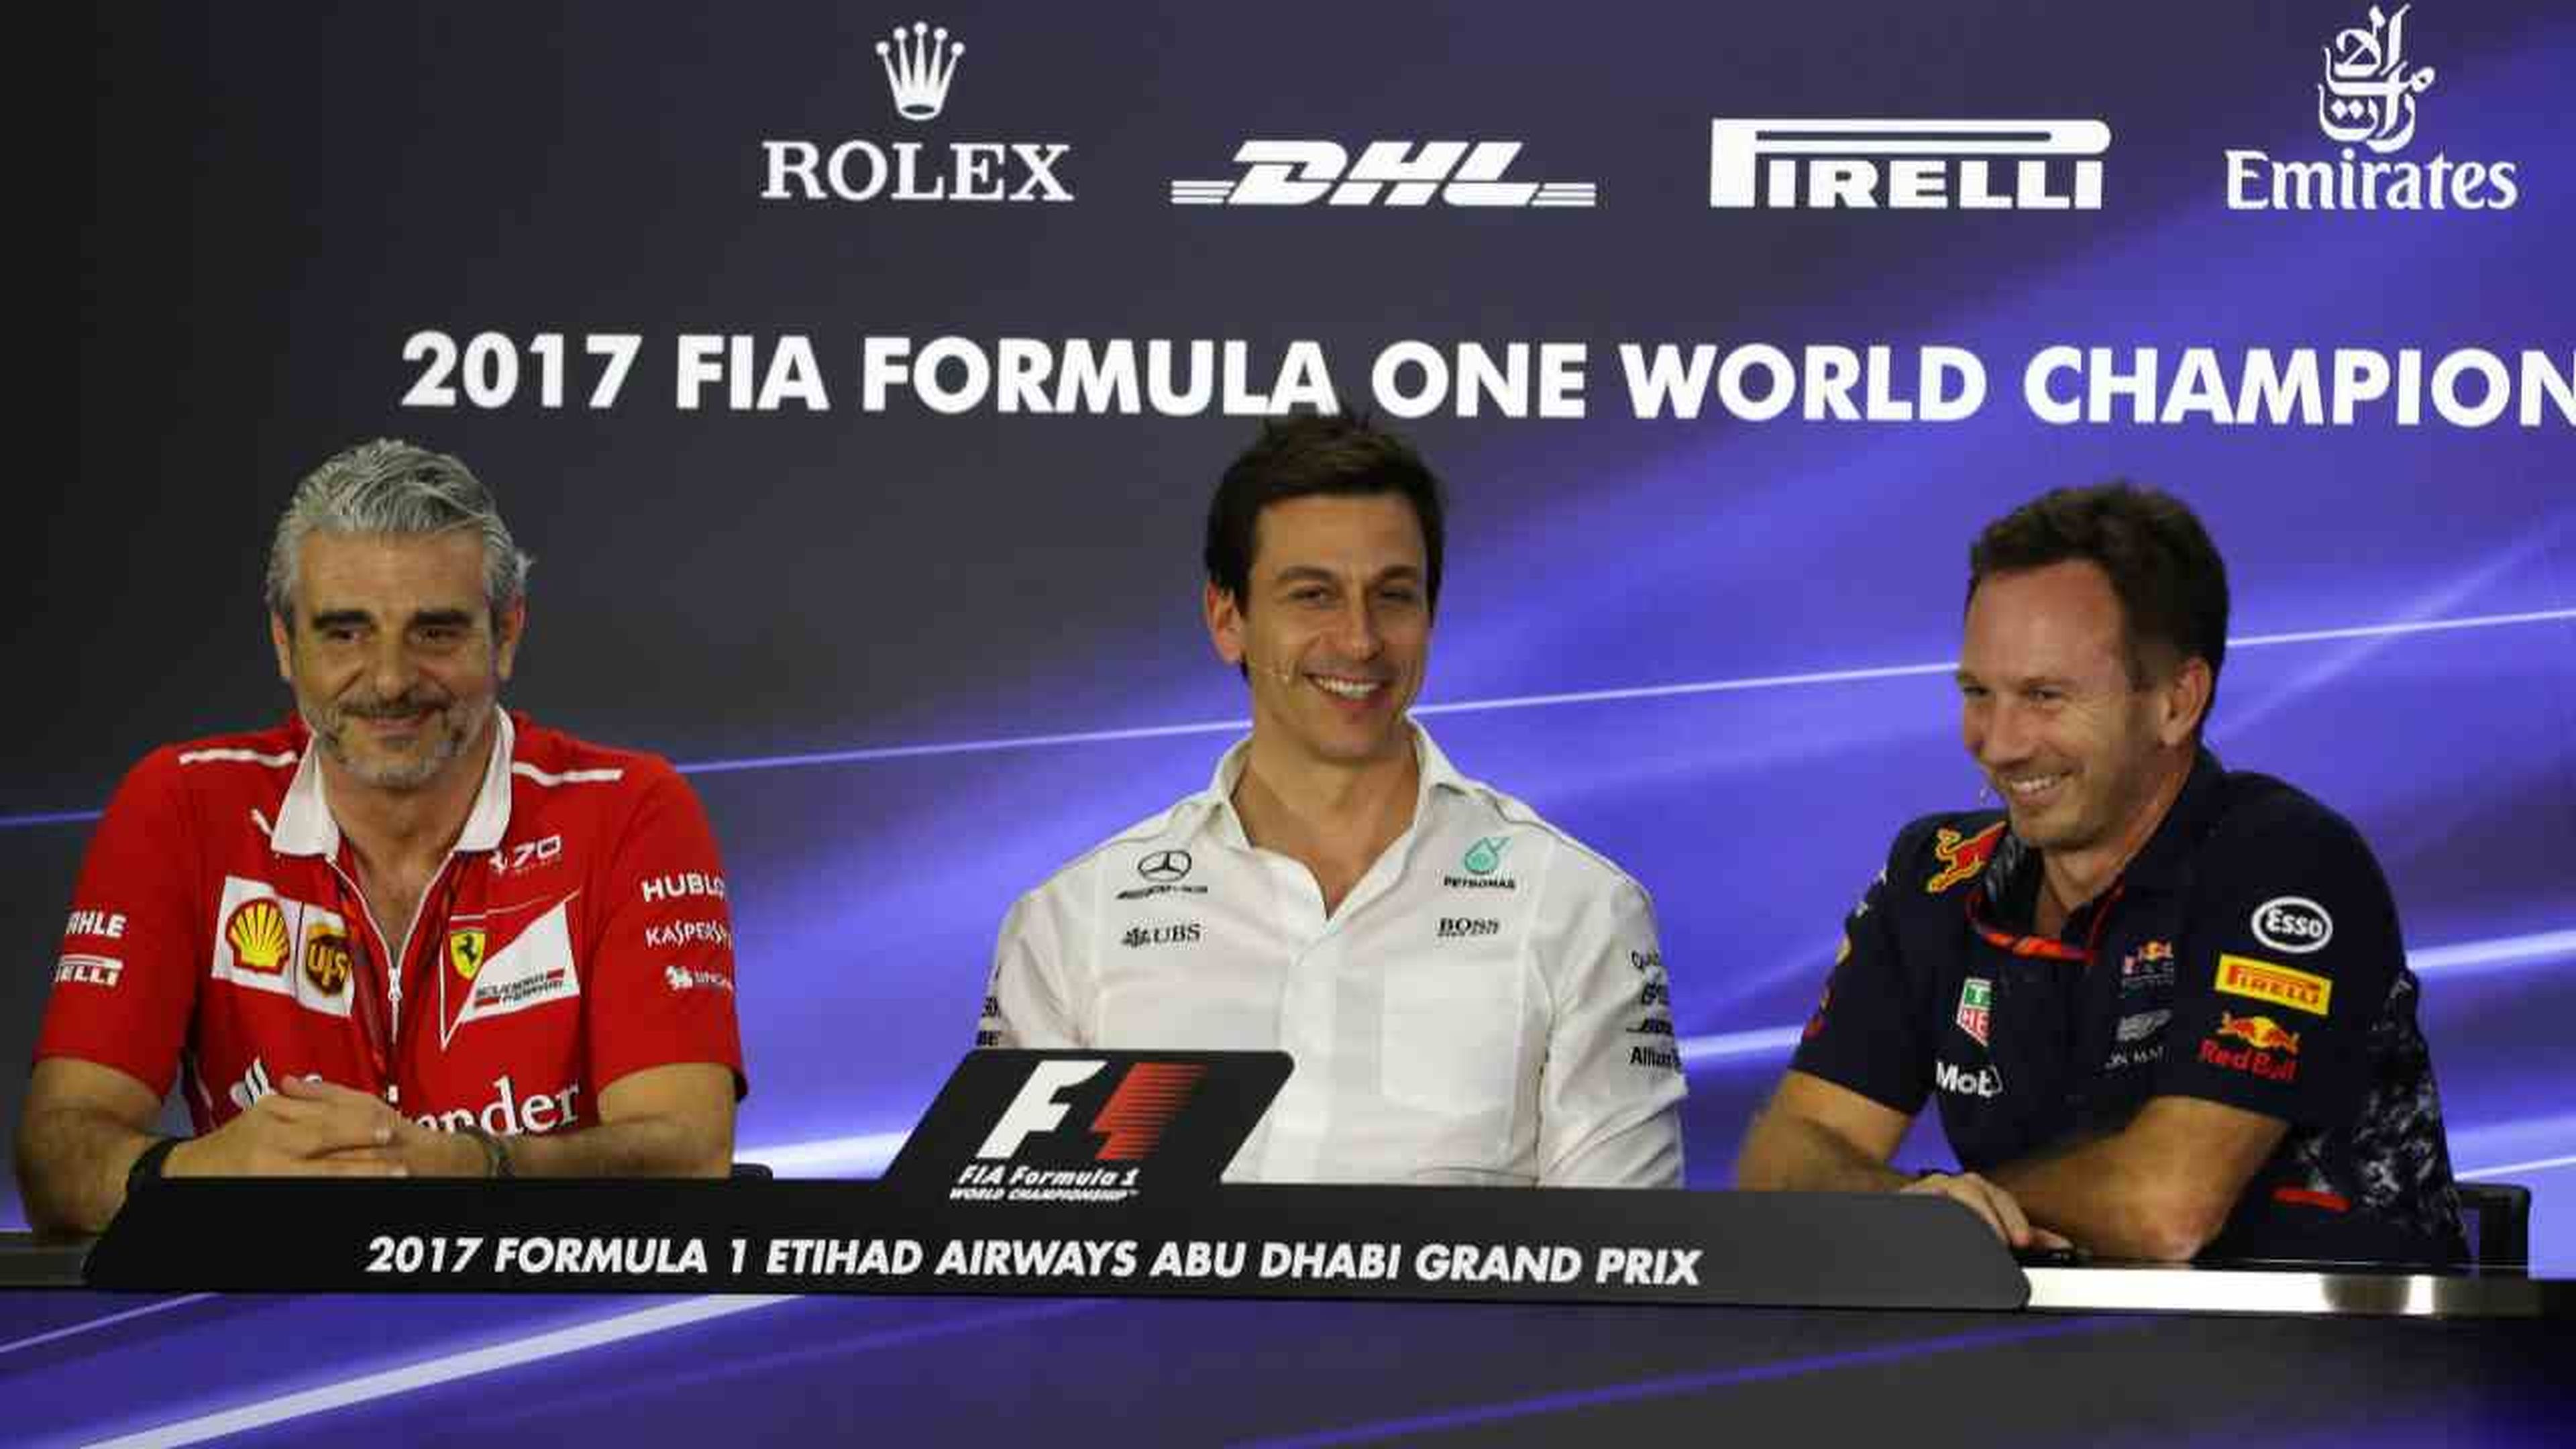 Toto Wolff, Arrivabene y Horner